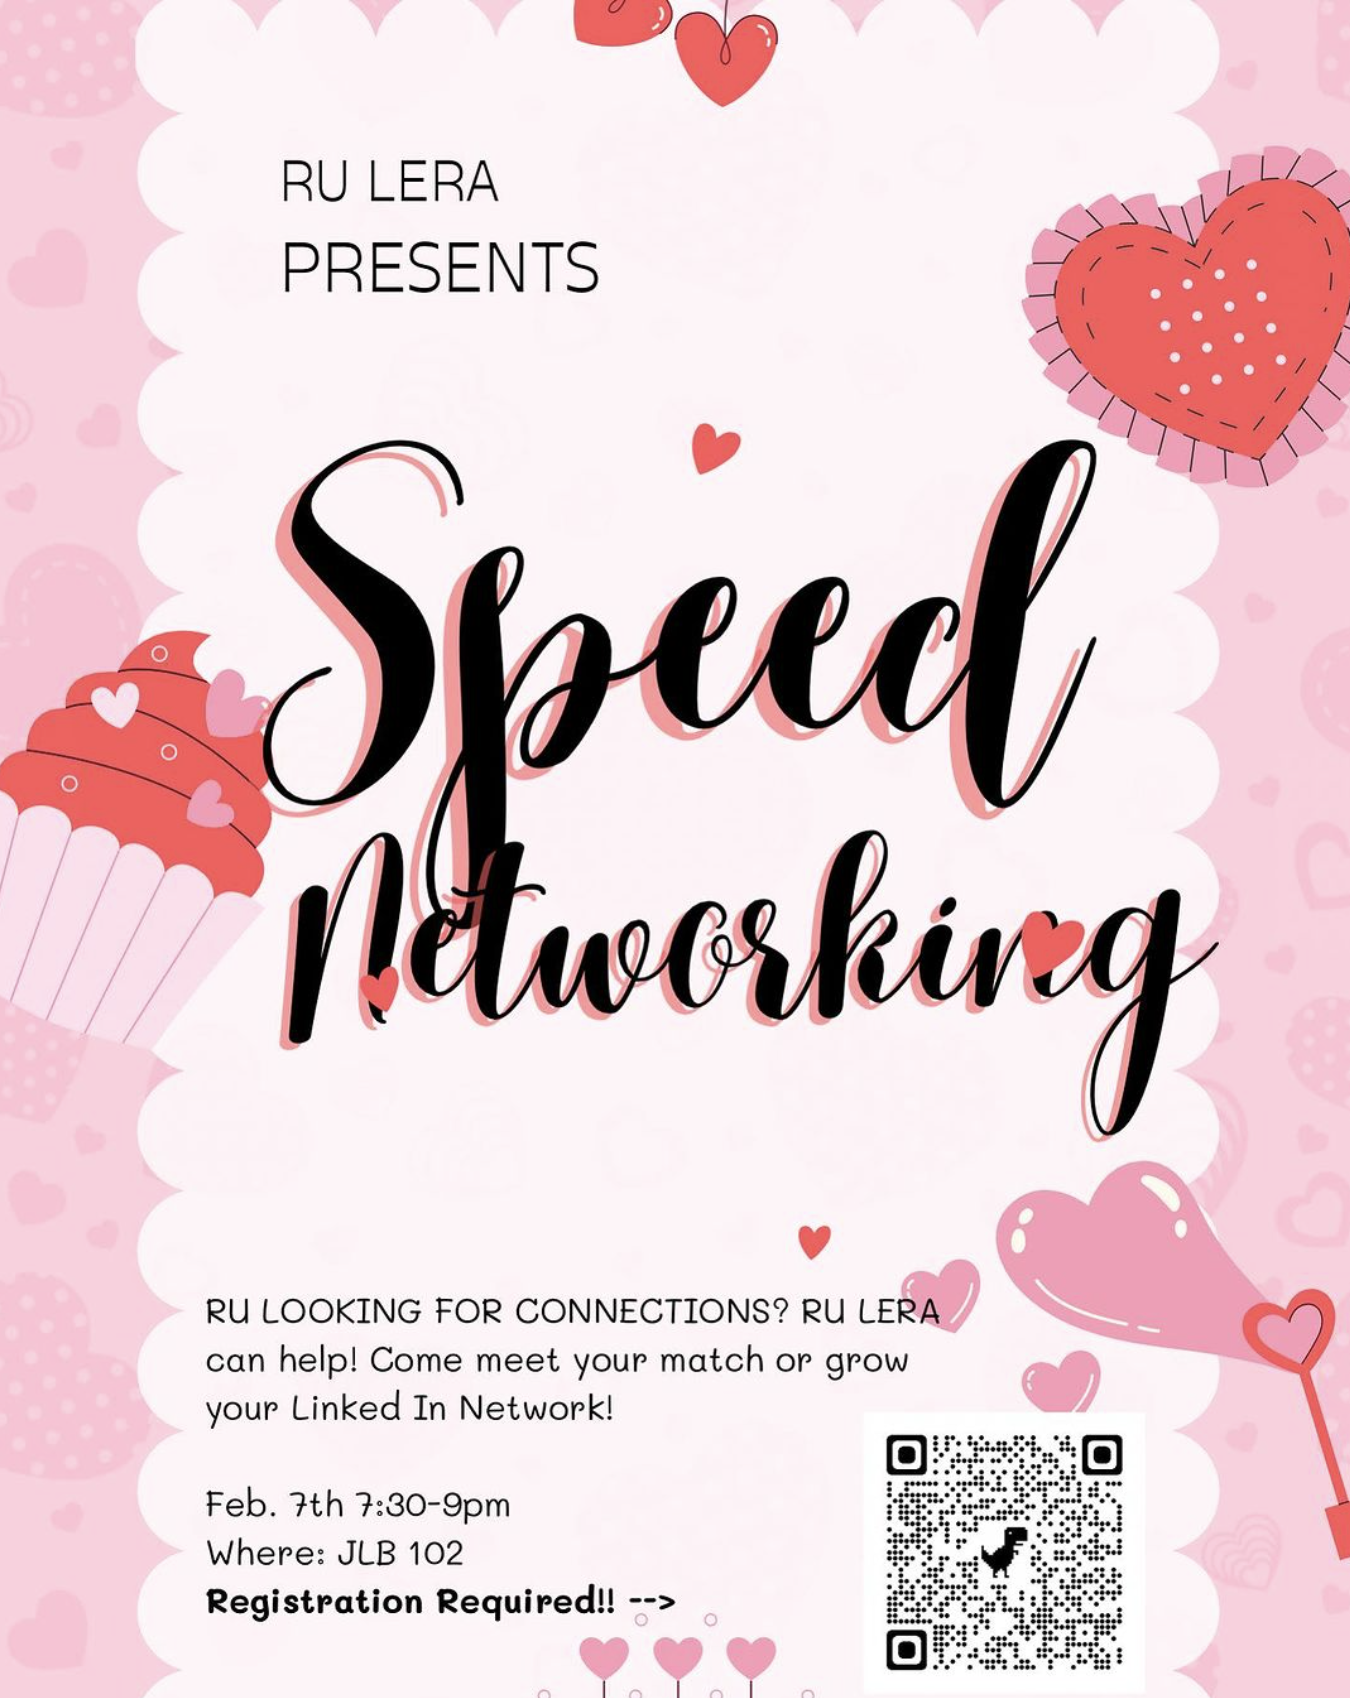 Image of RULERA Speed Networking Event